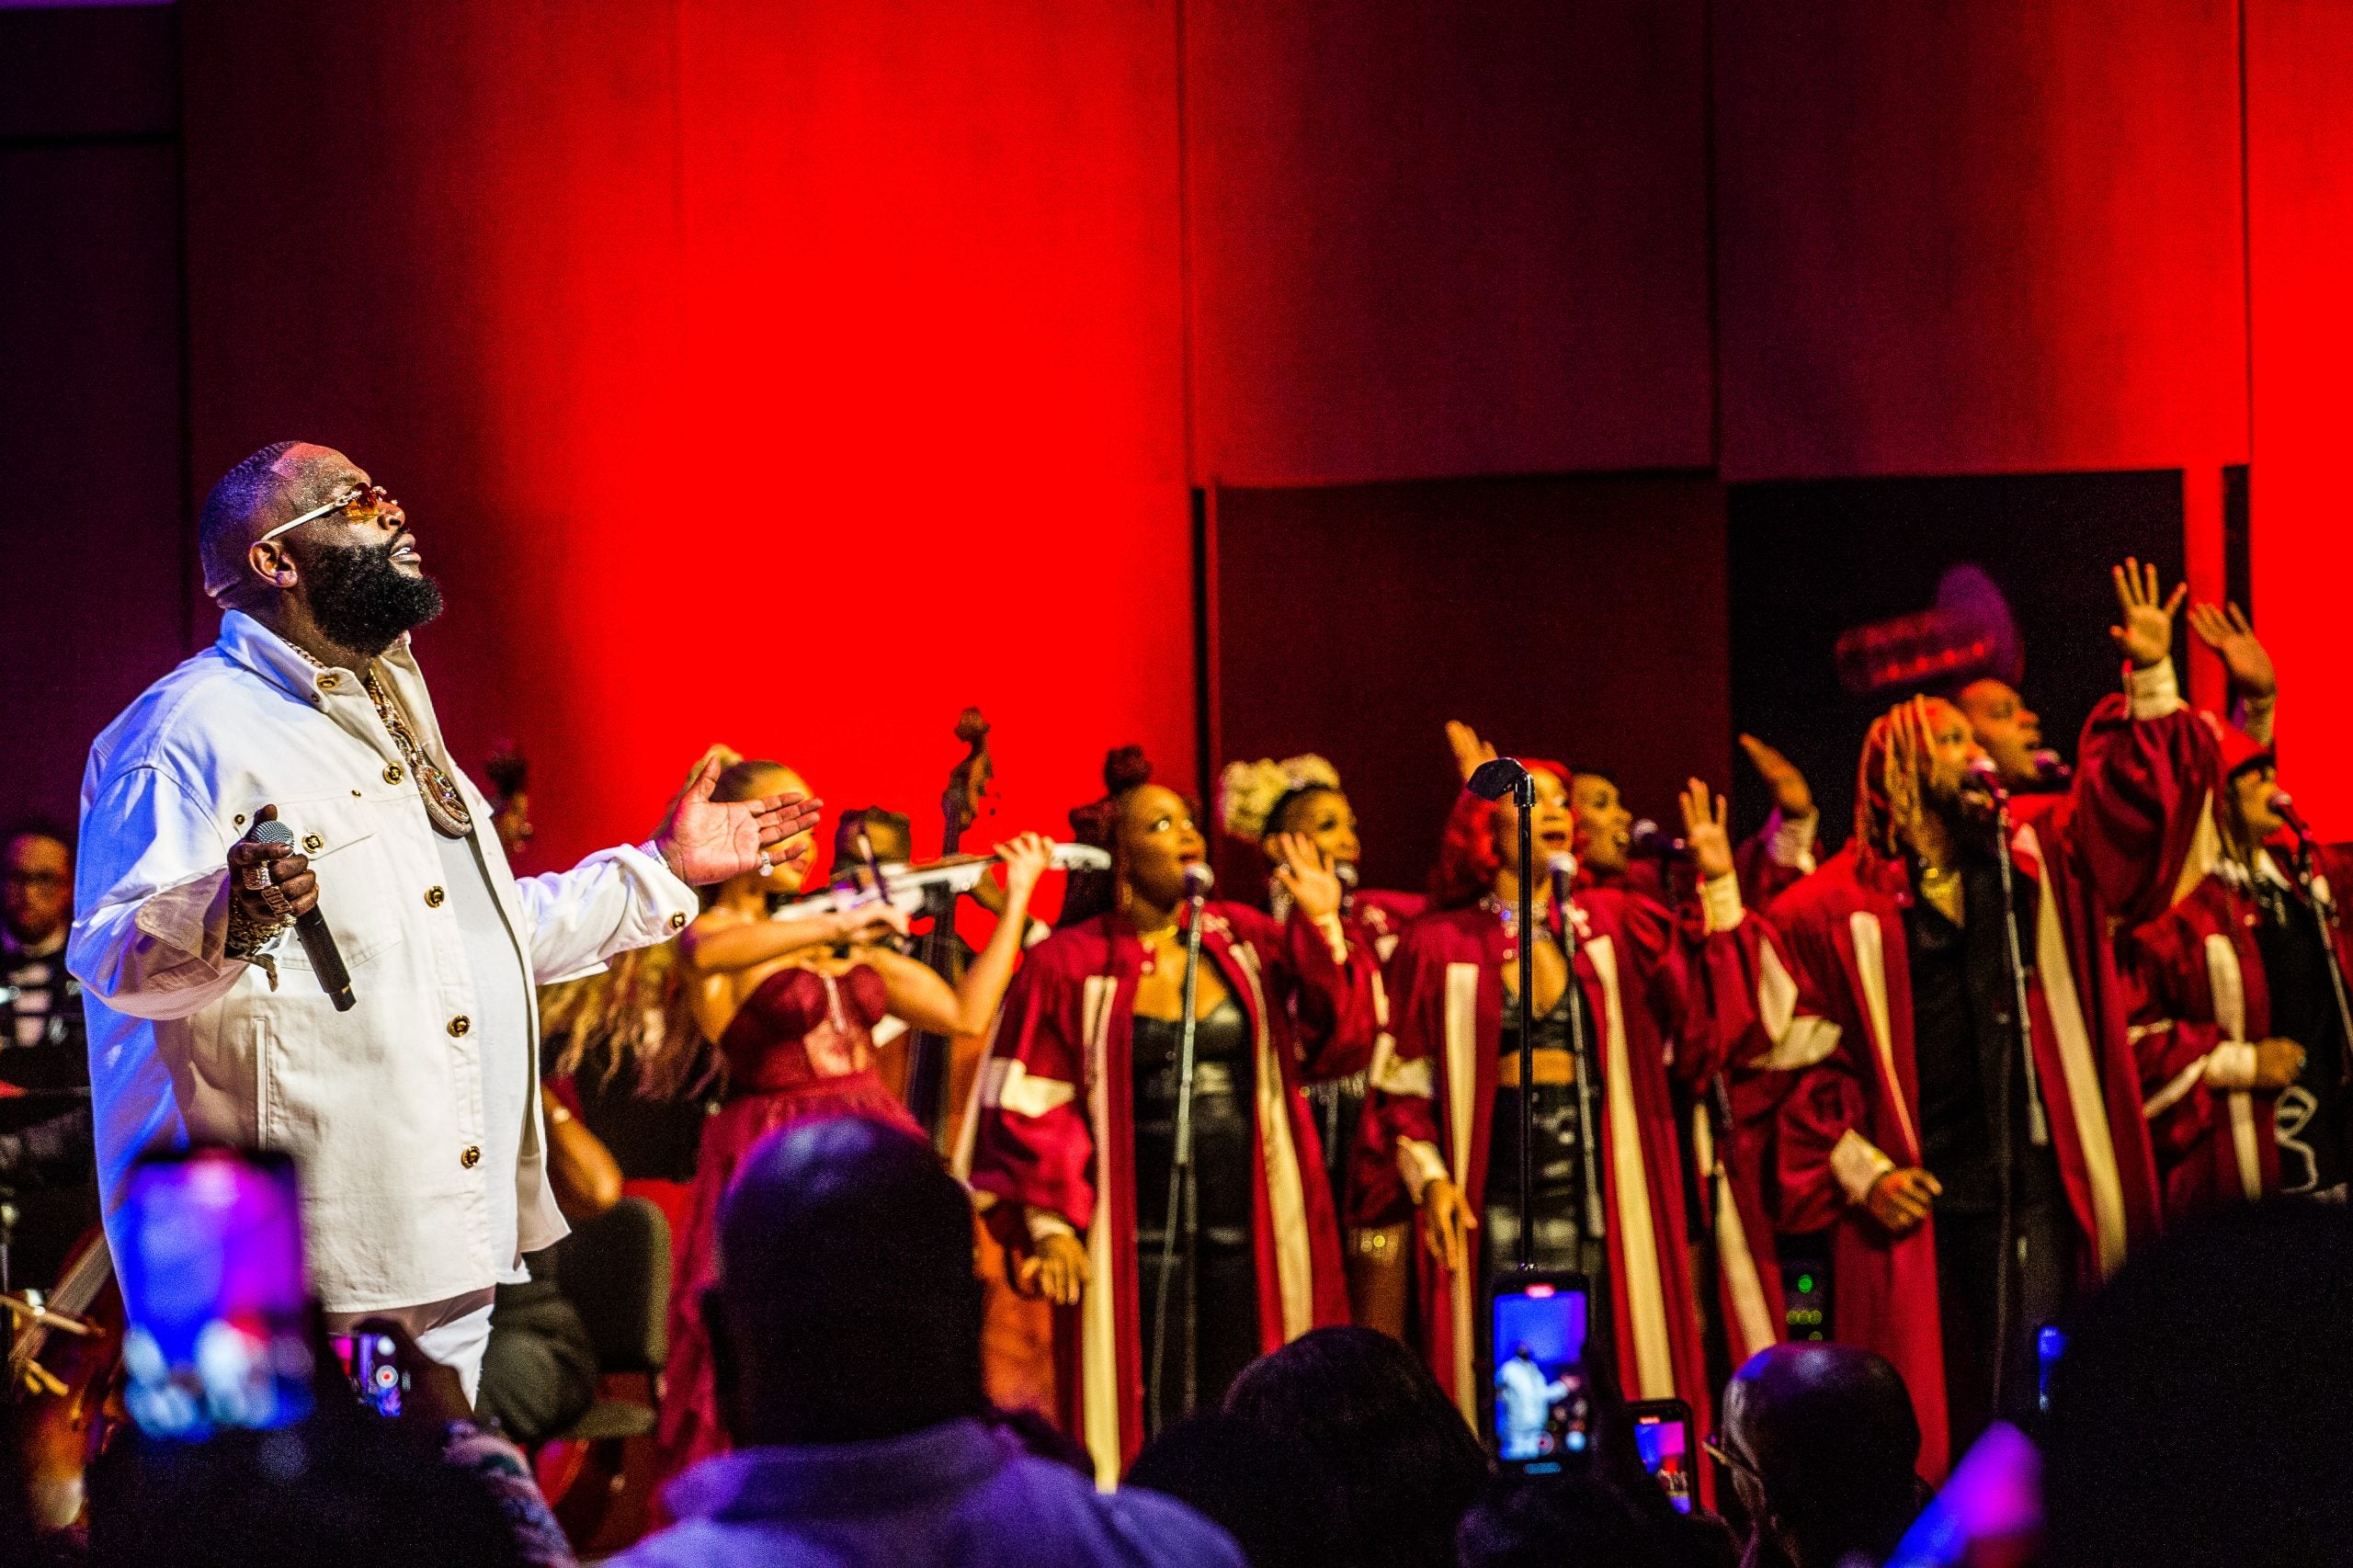 Rick Ross And Orchestra Noir Deliver A Powerful Performance For Red Bull Symphonic